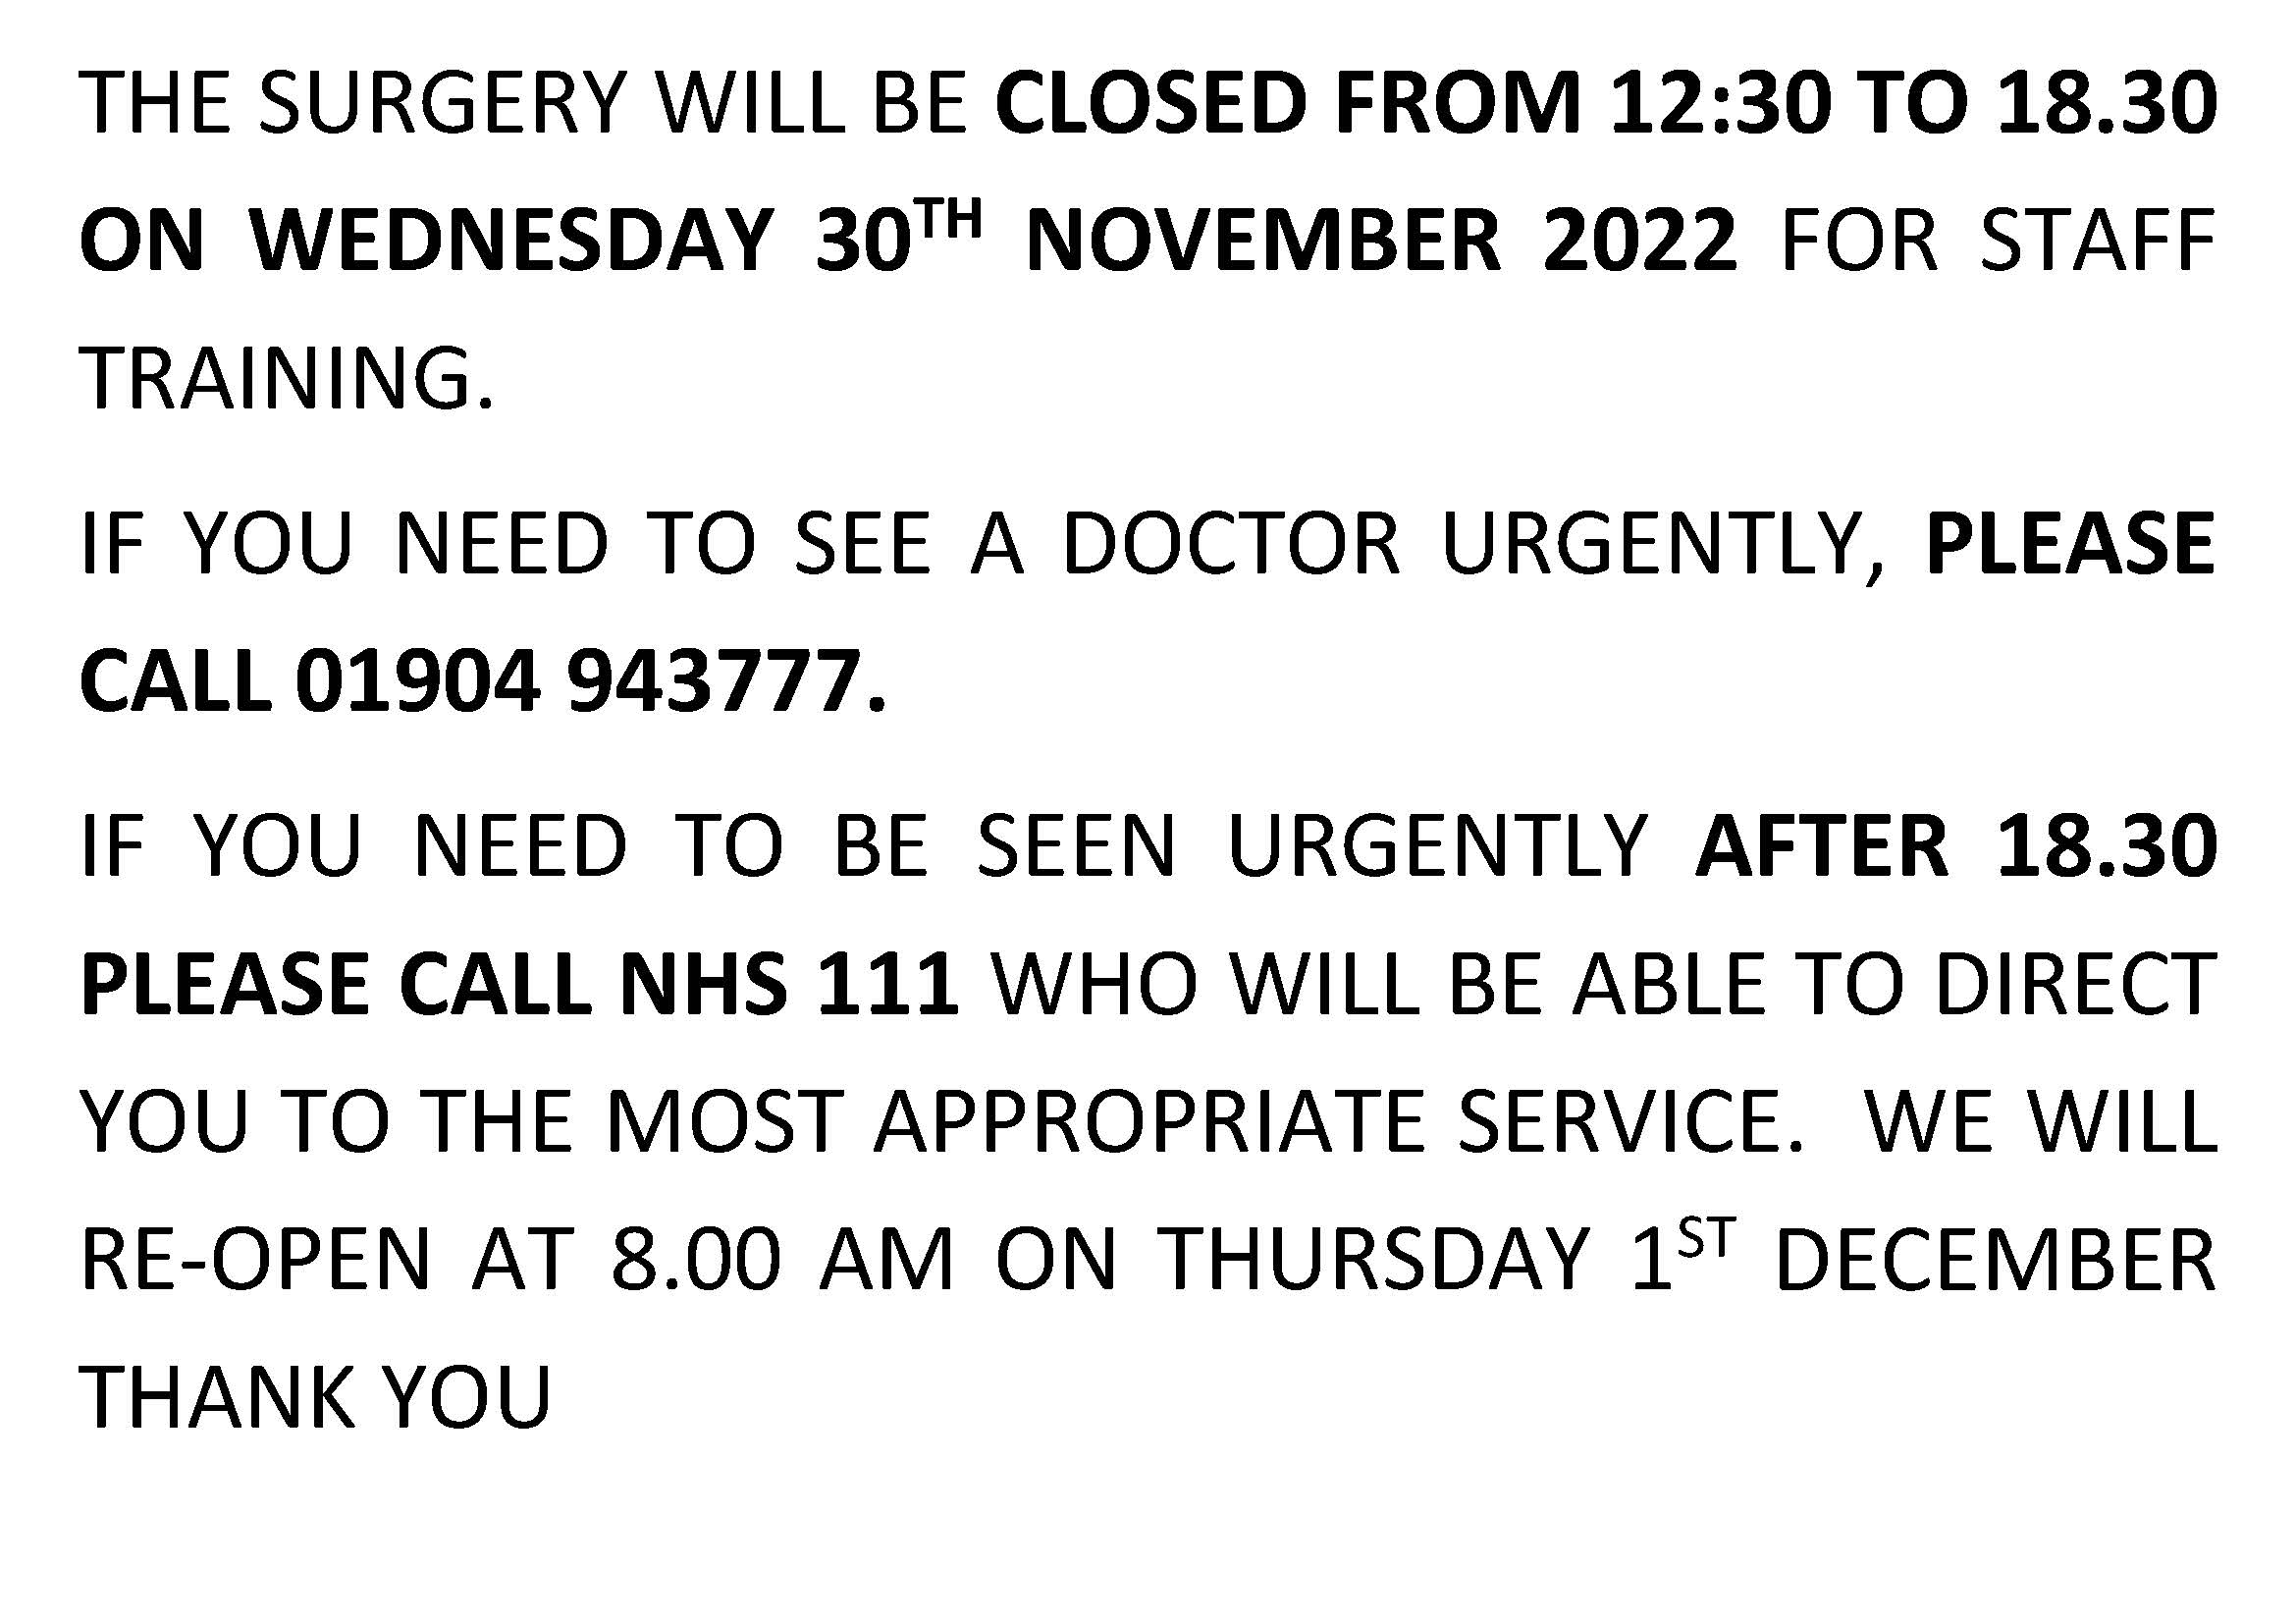 The surgery will be closed from 12:30 to 18:30 on Wednesday 30th November 2022 for staff training.